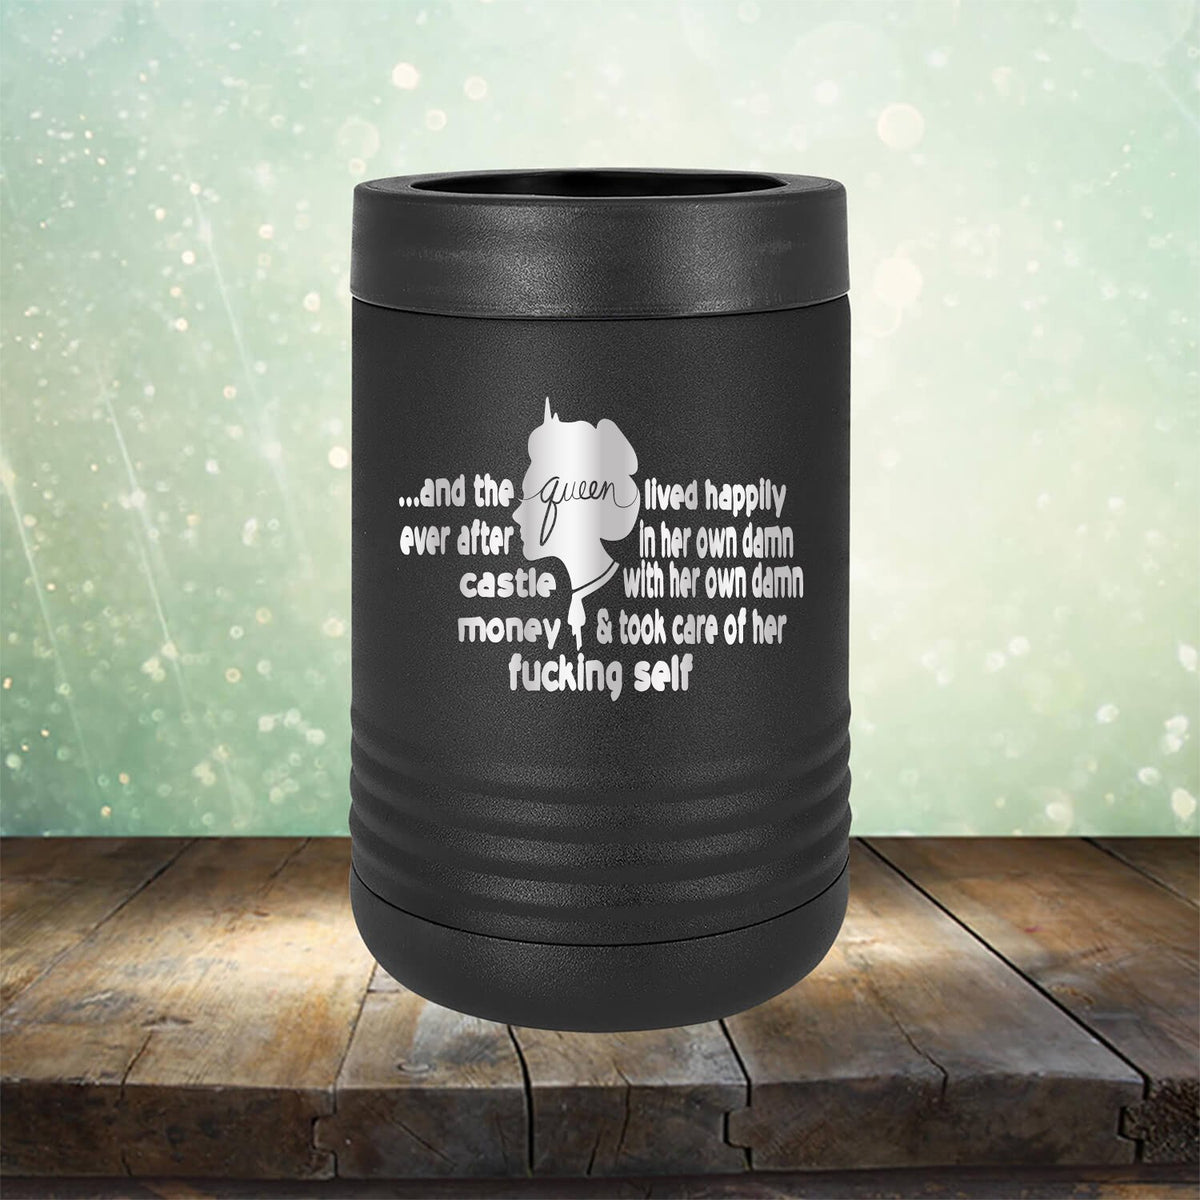 And The Queen Lived Happily After Ever In Her Own Damn Castle With Her Own Damn Money &amp; Took Care of Her Fucking Self - Laser Etched Tumbler Mug